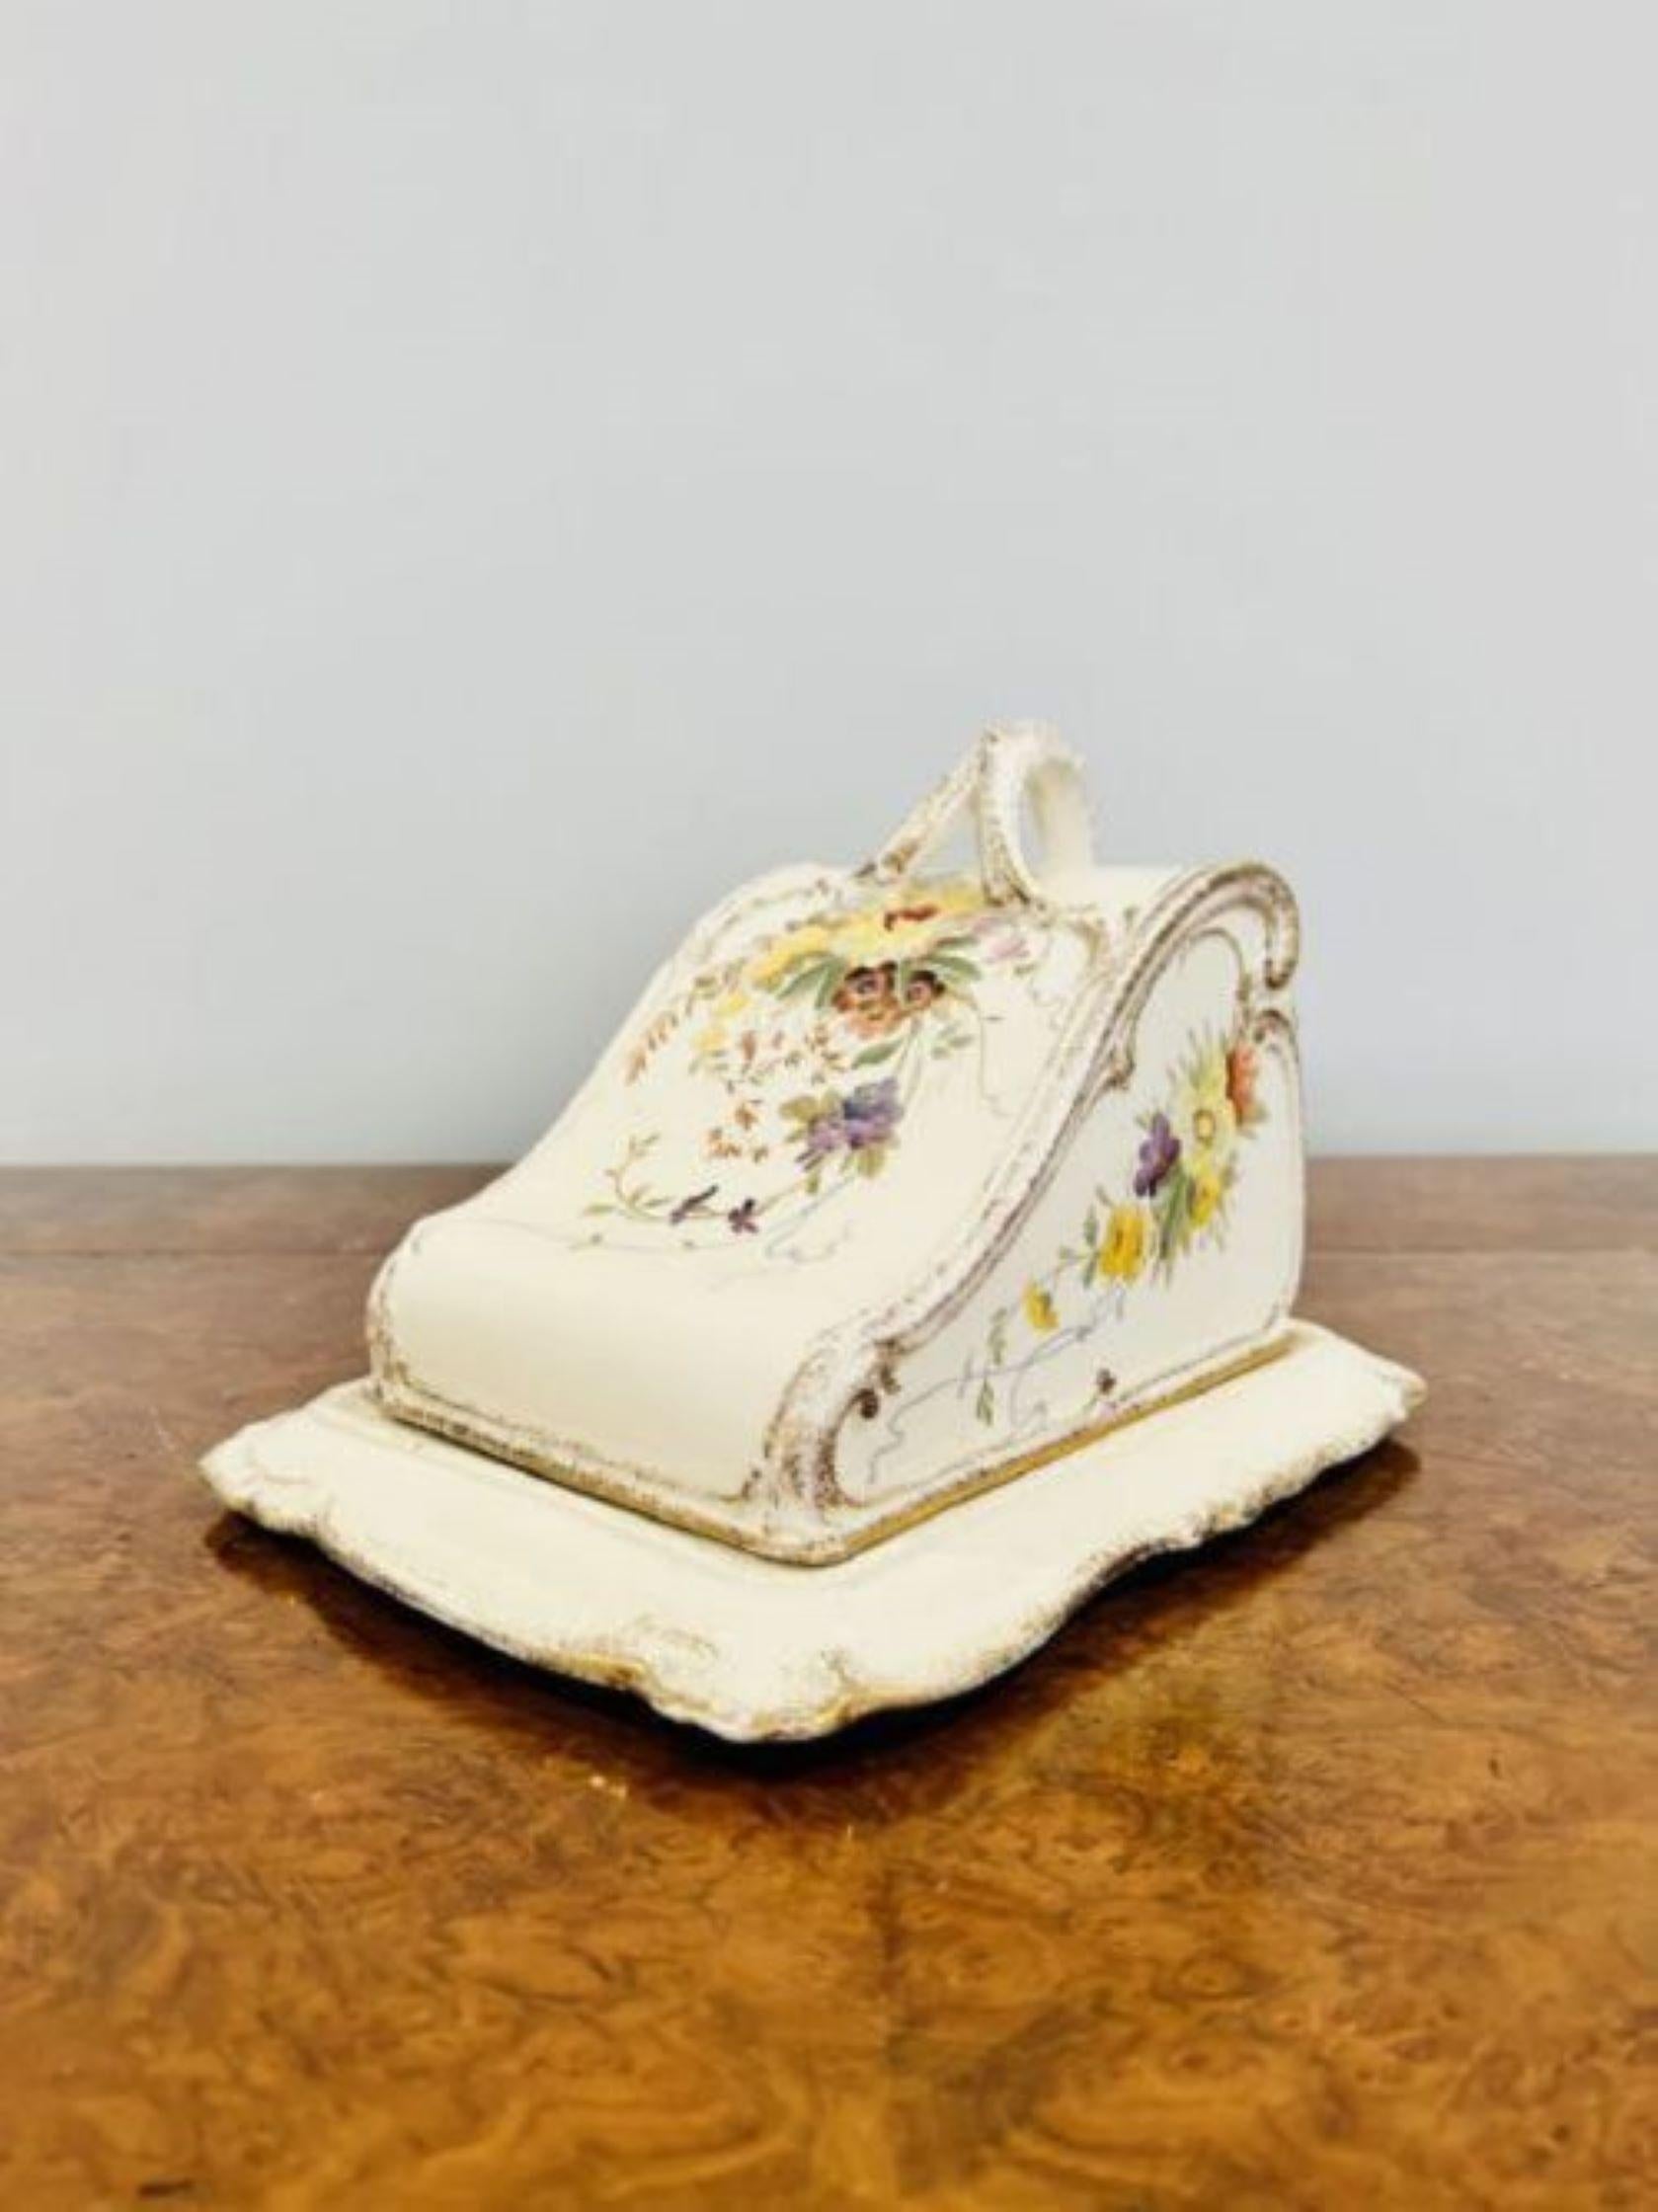 Quality antique cheese dish having hand painted floral decoration in wonderful yellow, green, orange, purple, gold and white colours with a shaped handle to the top with the original base